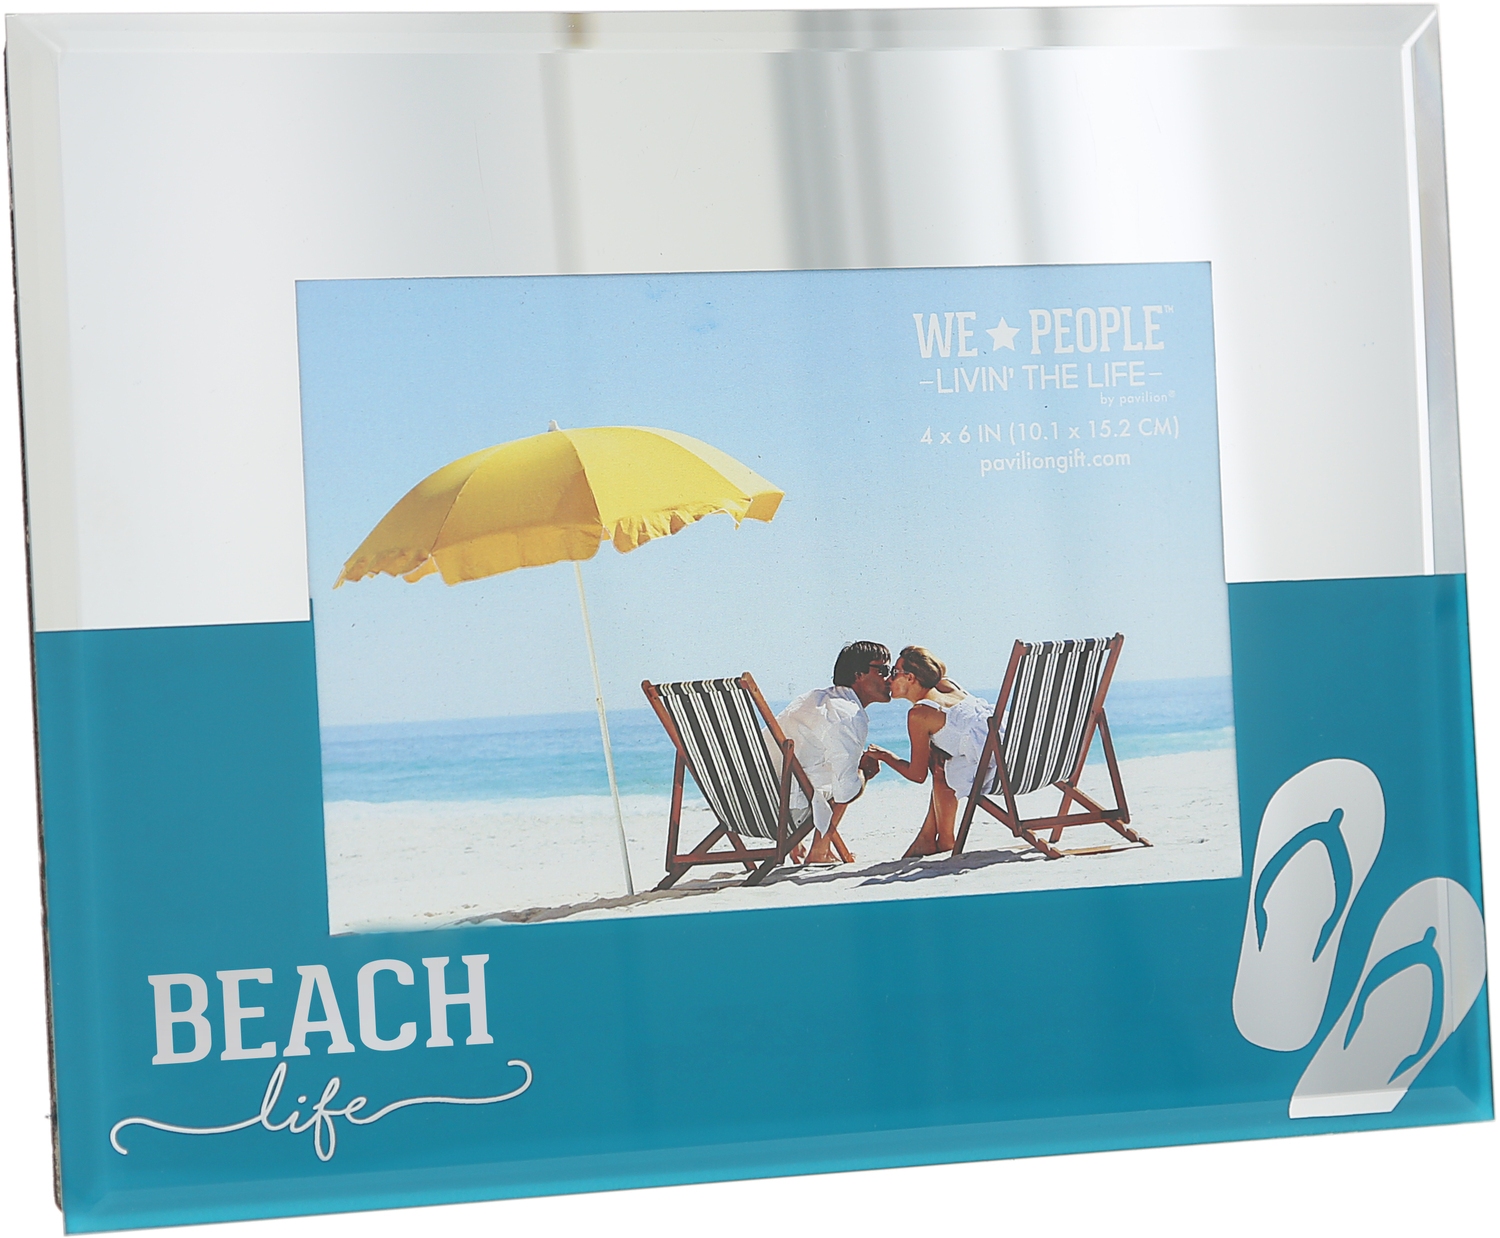 Beach Life by We People - Beach Life - 9" x 7" Mirrored Glass Frame
(Holds 6" x 4")